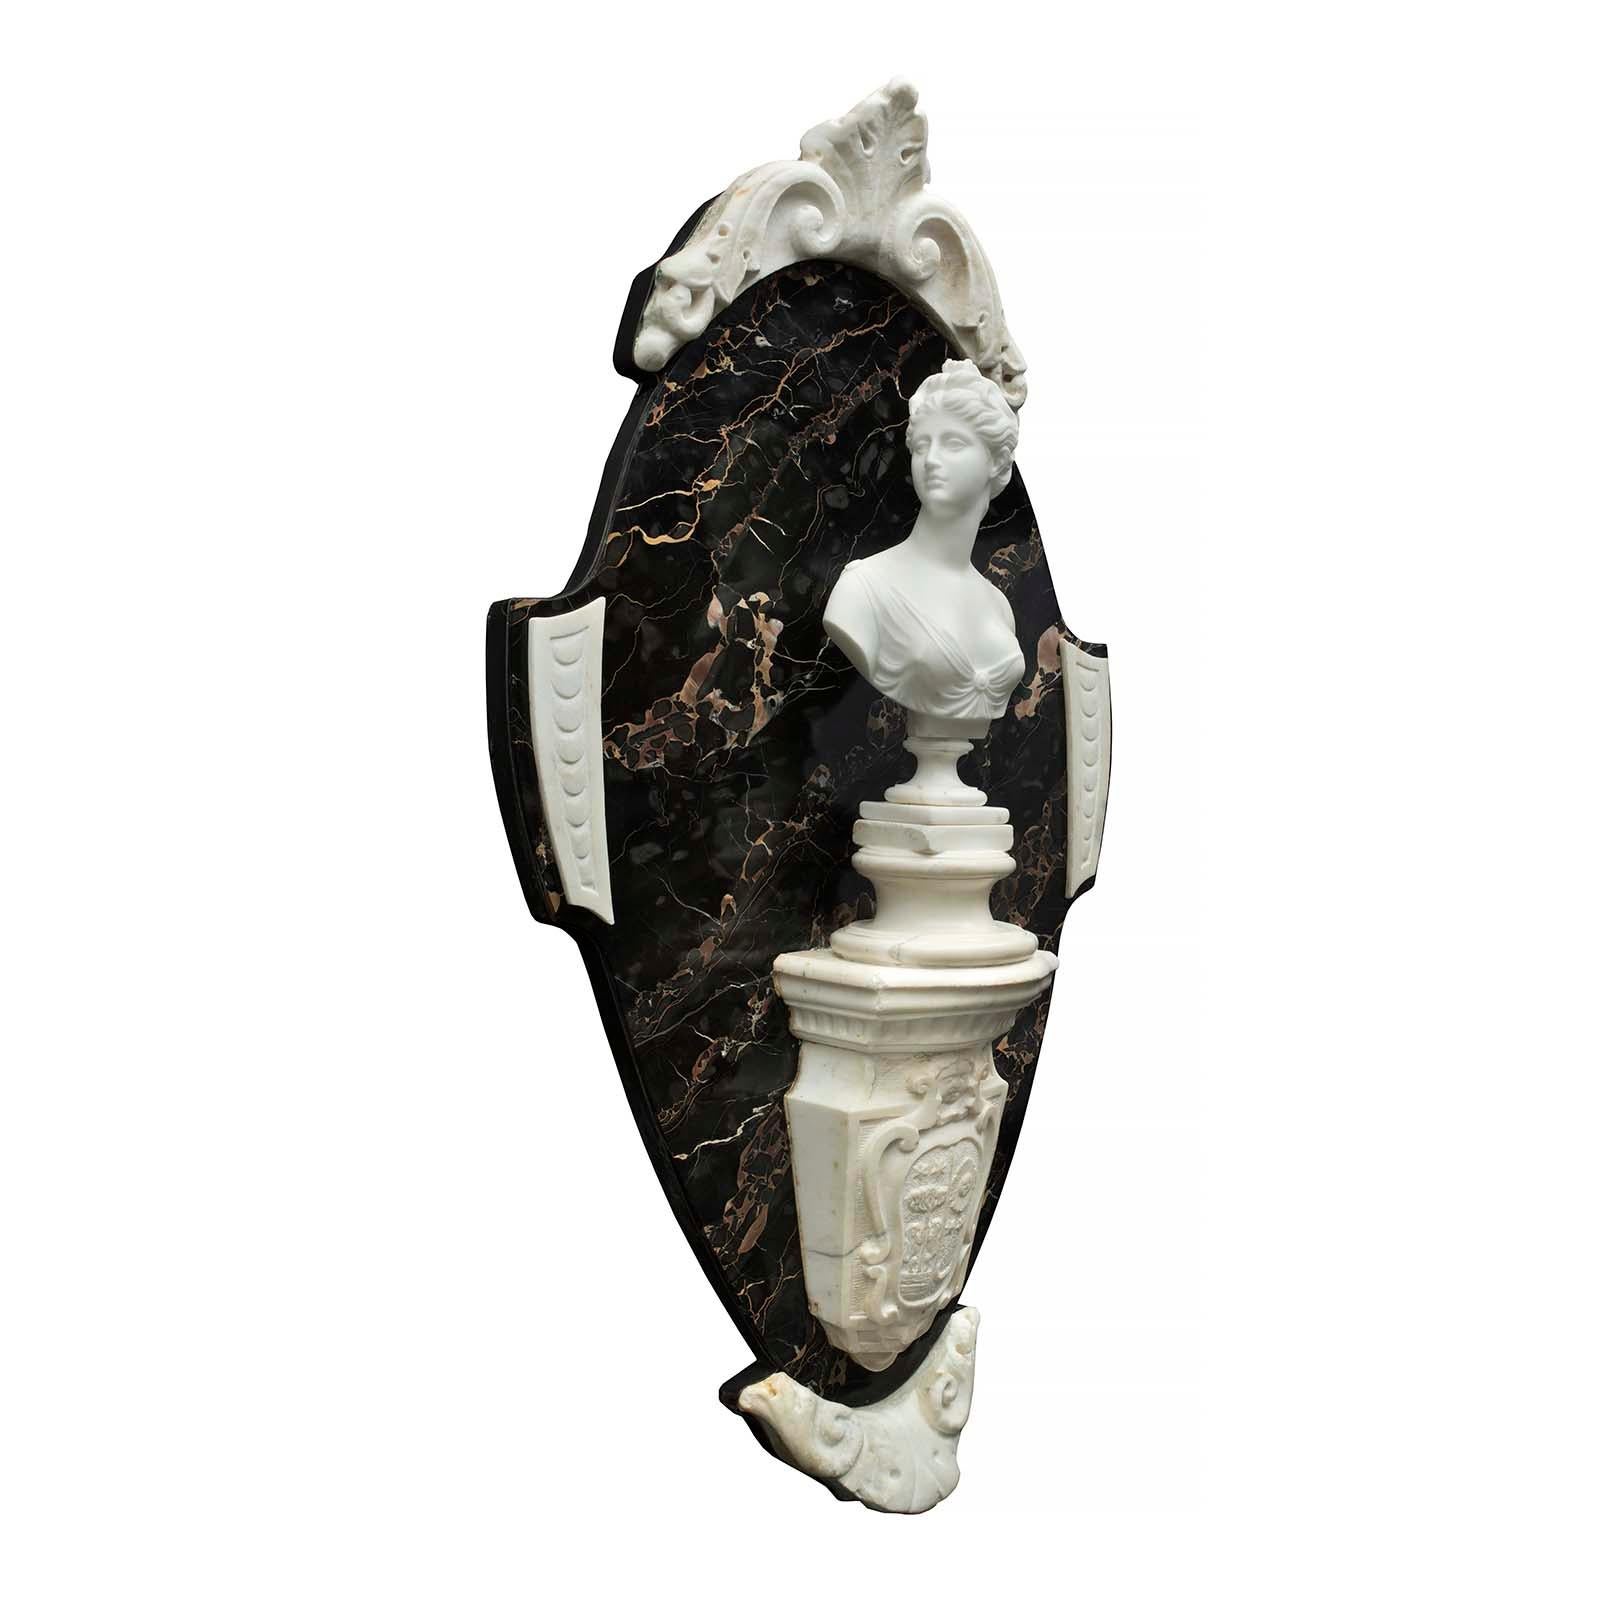 A sensational and large scale Italian 19th century Portoro and white Carrara marble wall crest. The crest with an oblong design has a bottom acanthus leaf below the carved family crest. Above the crest is a column supporting an elegant bust of Diana